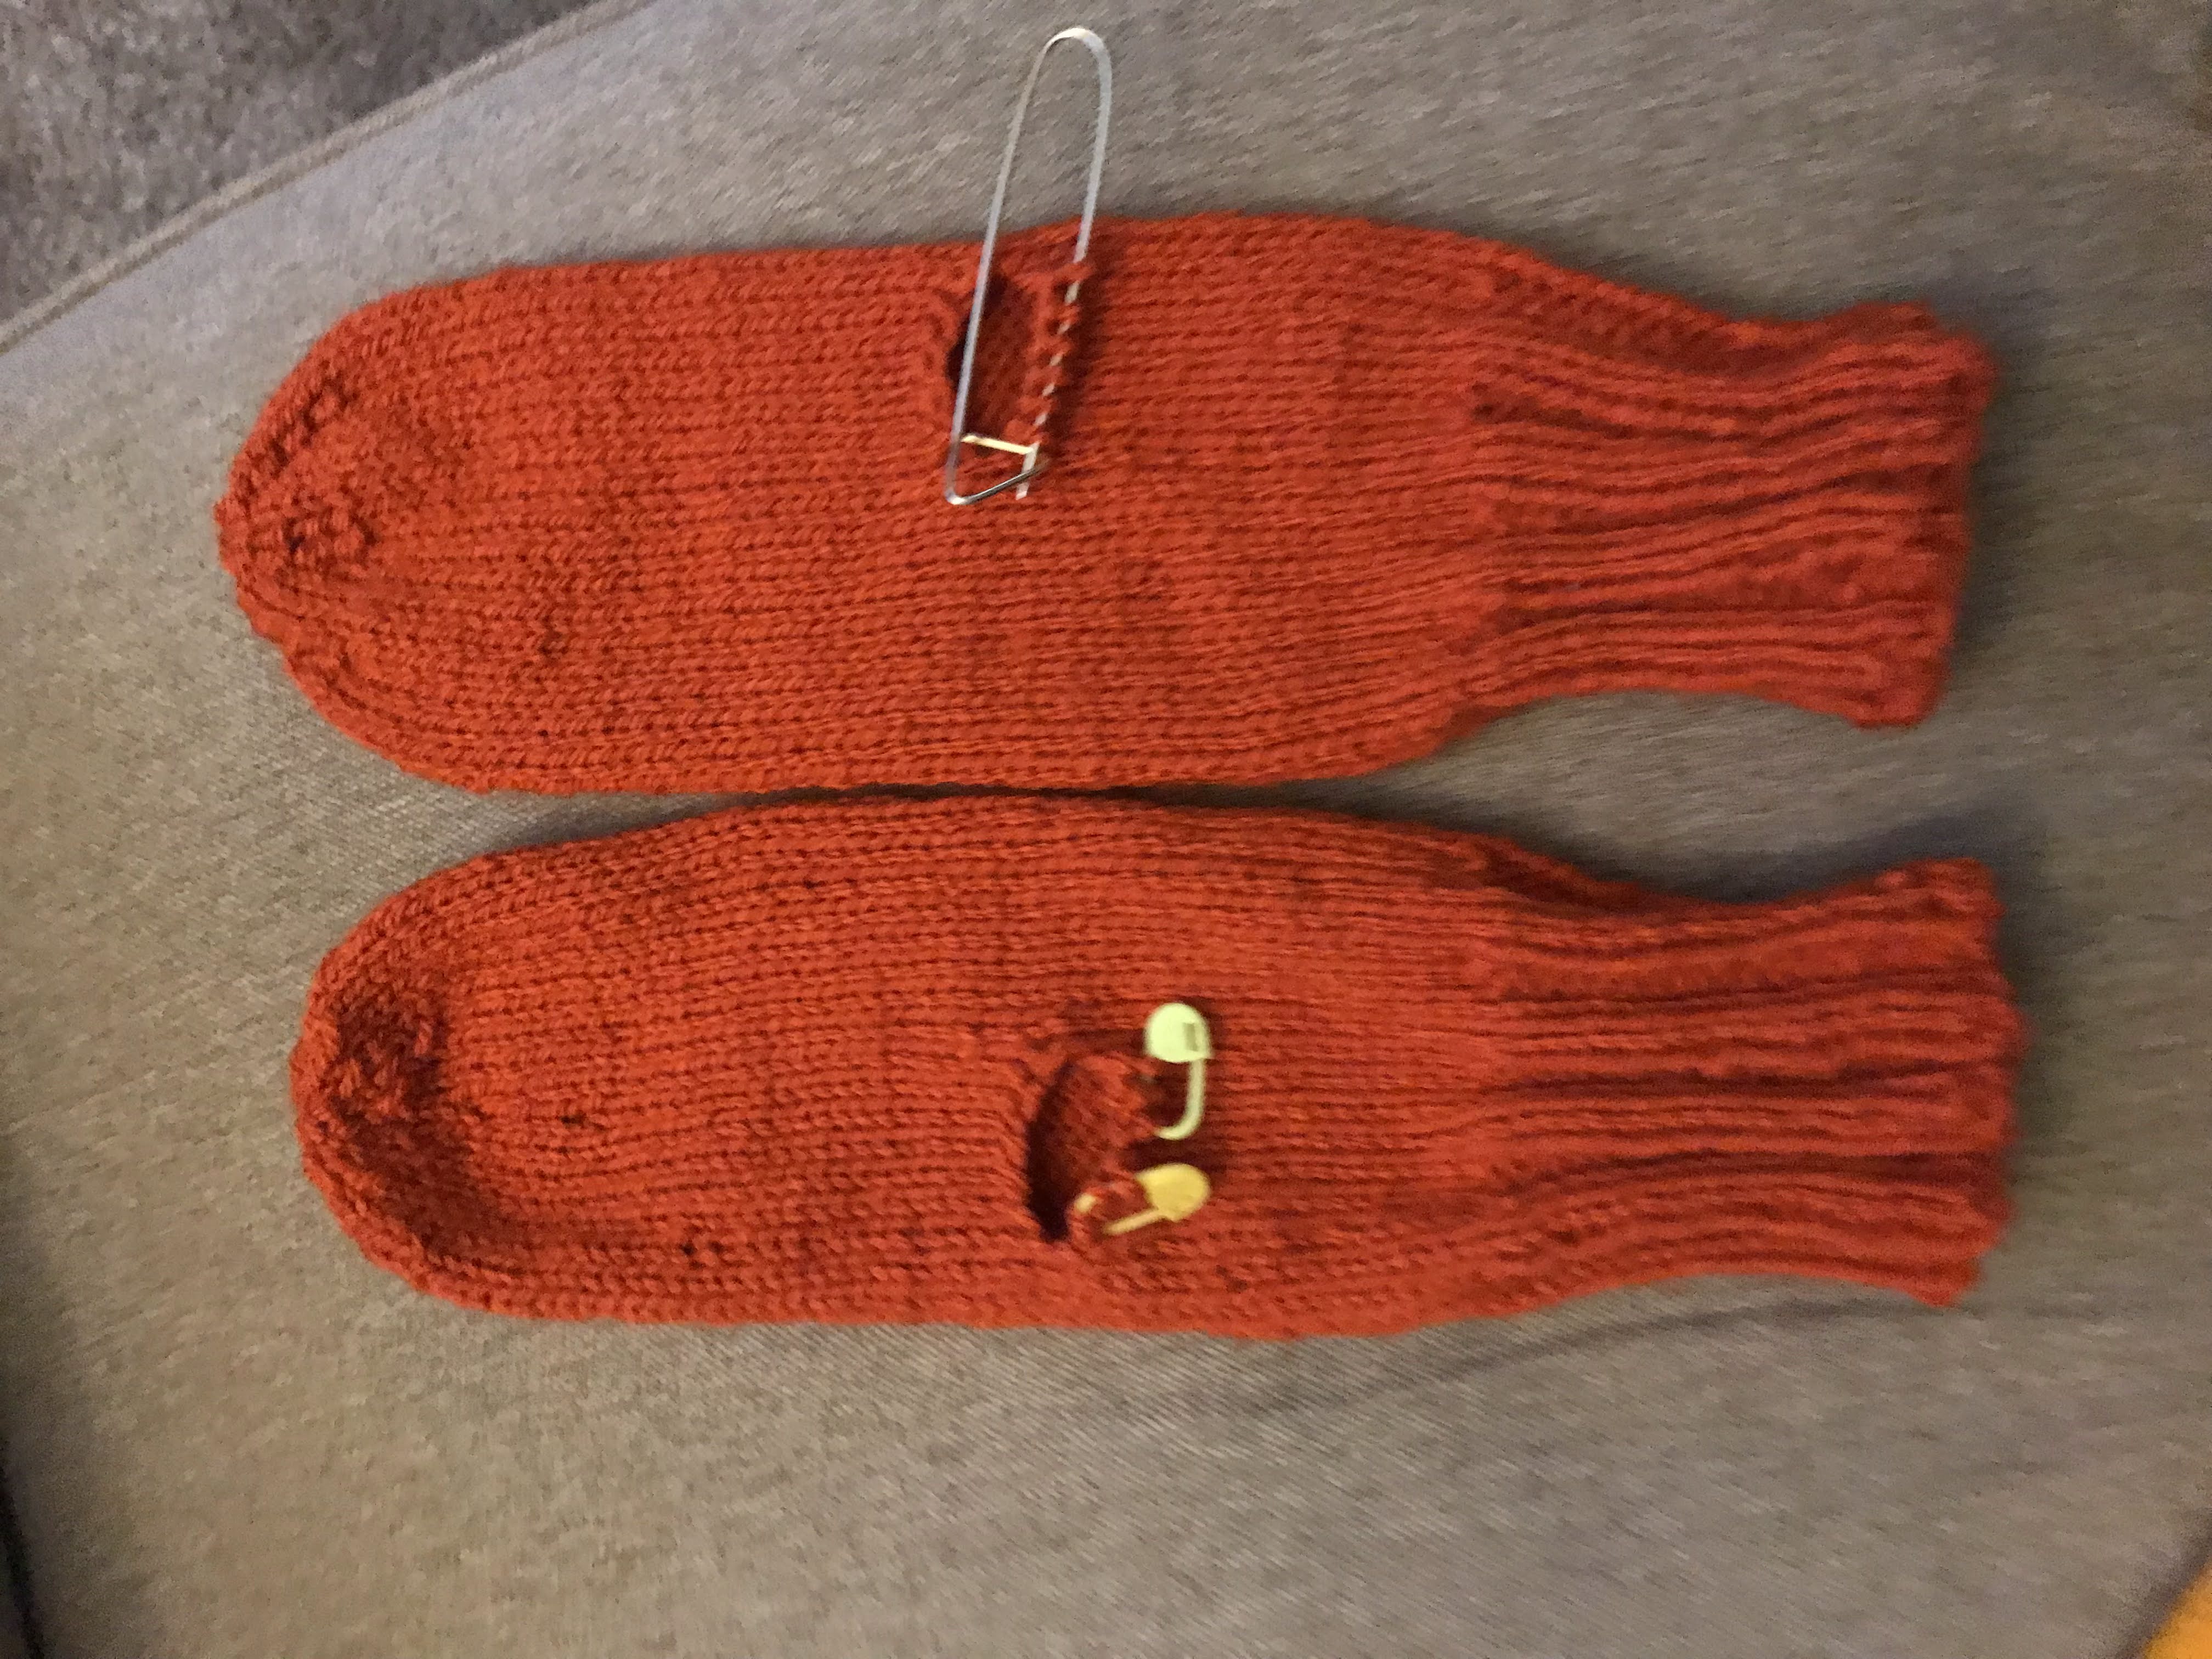 Mitten Front before thumb